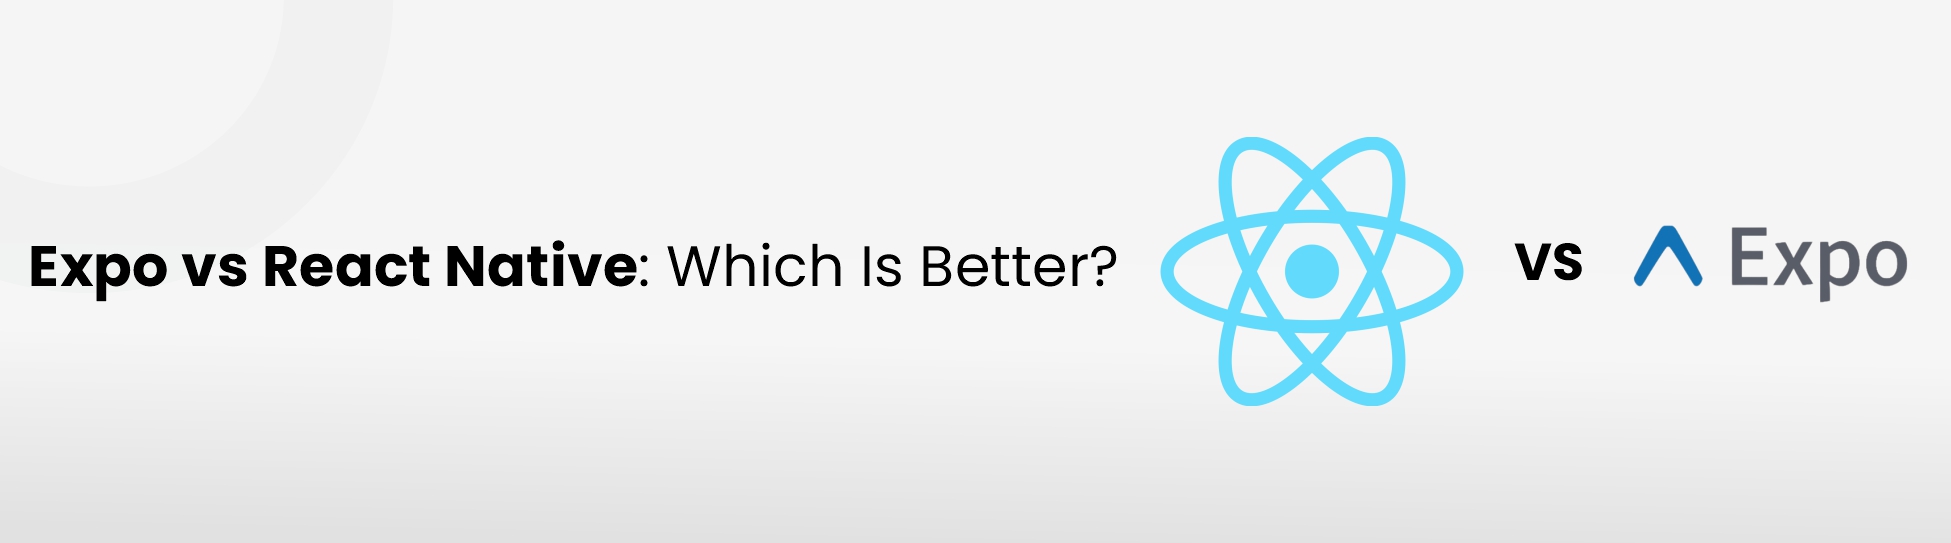 Expo vs React Native: Which Is Better?